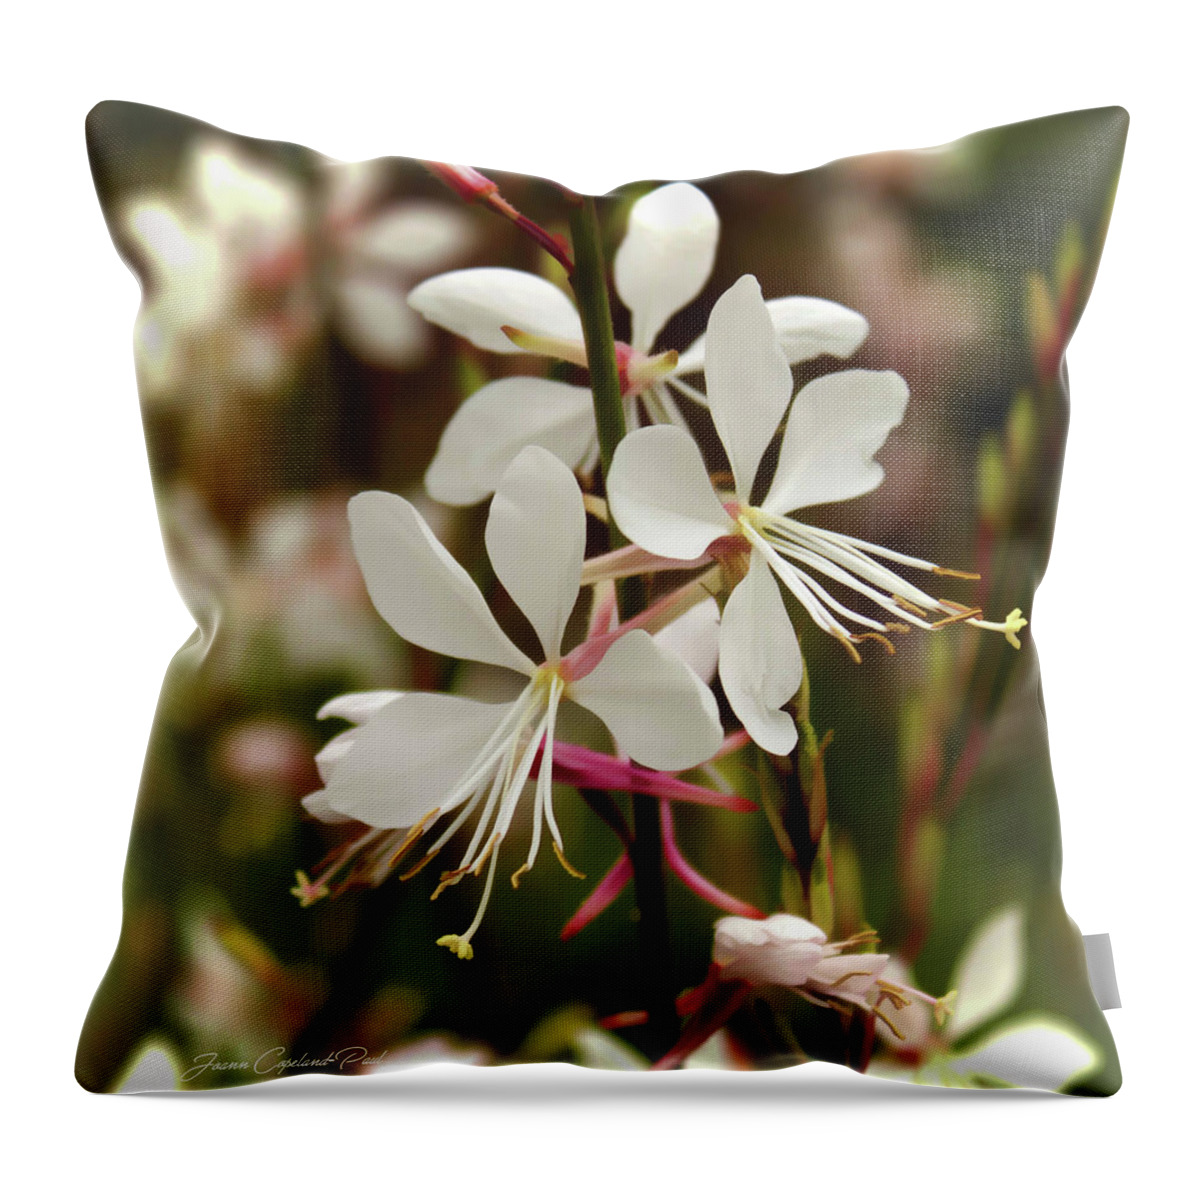 Nature Throw Pillow featuring the photograph Delicate Gaura Flowers by Joann Copeland-Paul